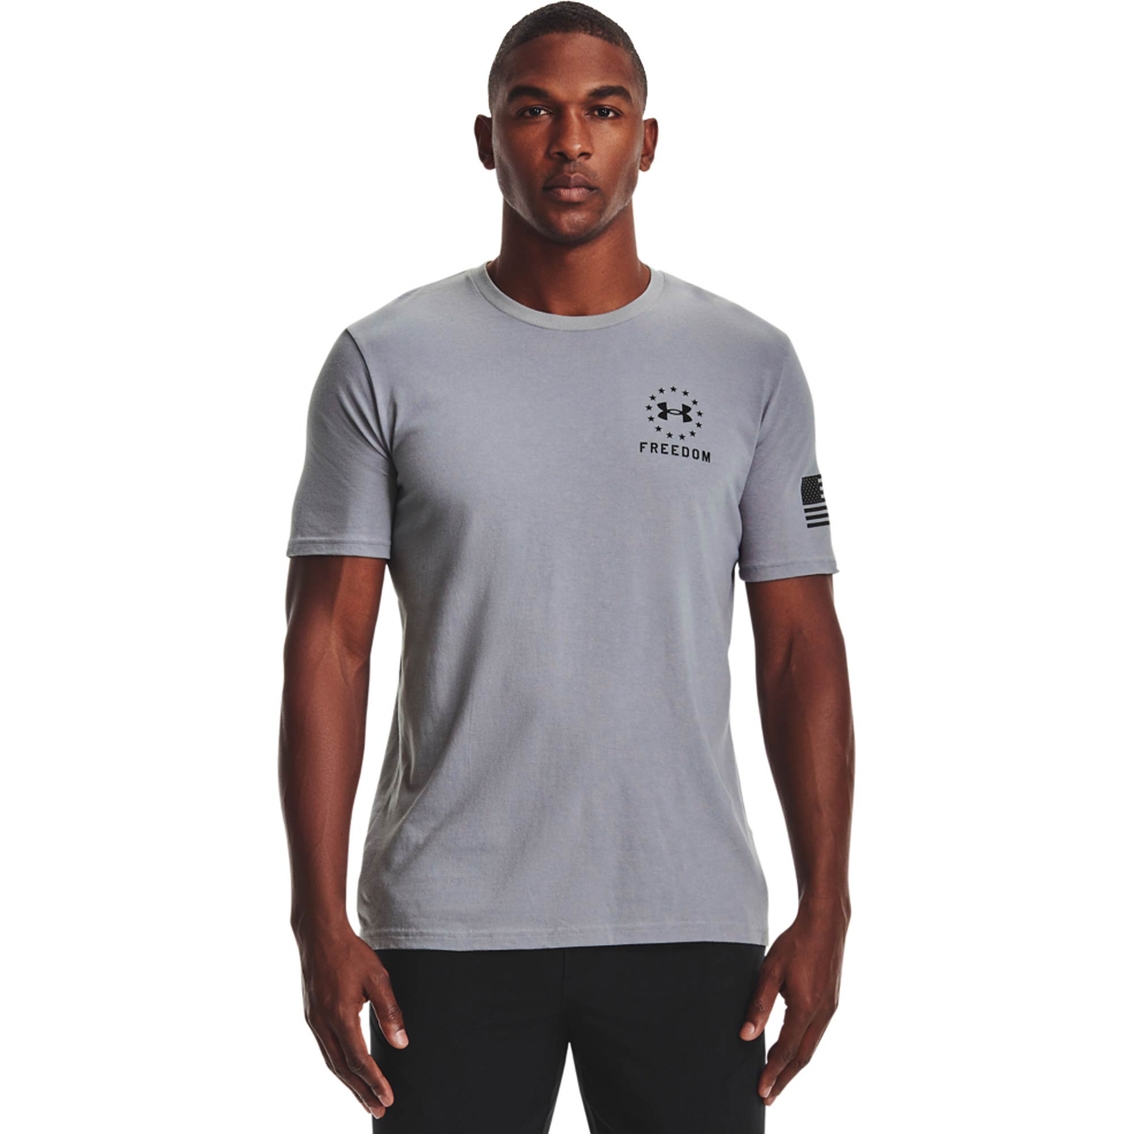 Under Armour Freedom Snake Tee | T-shirts | Clothing & Accessories ...